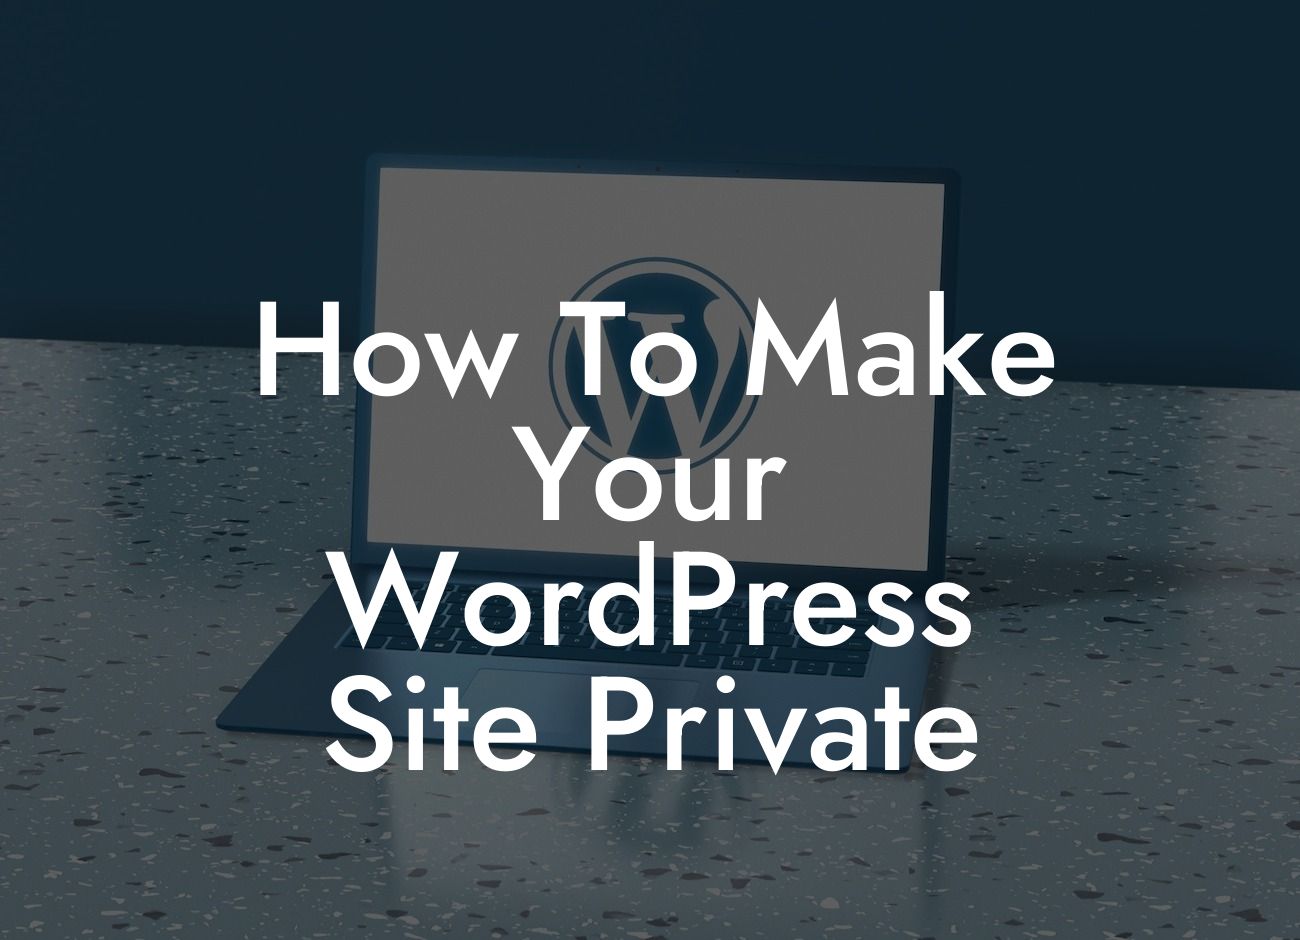 How To Make Your WordPress Site Private